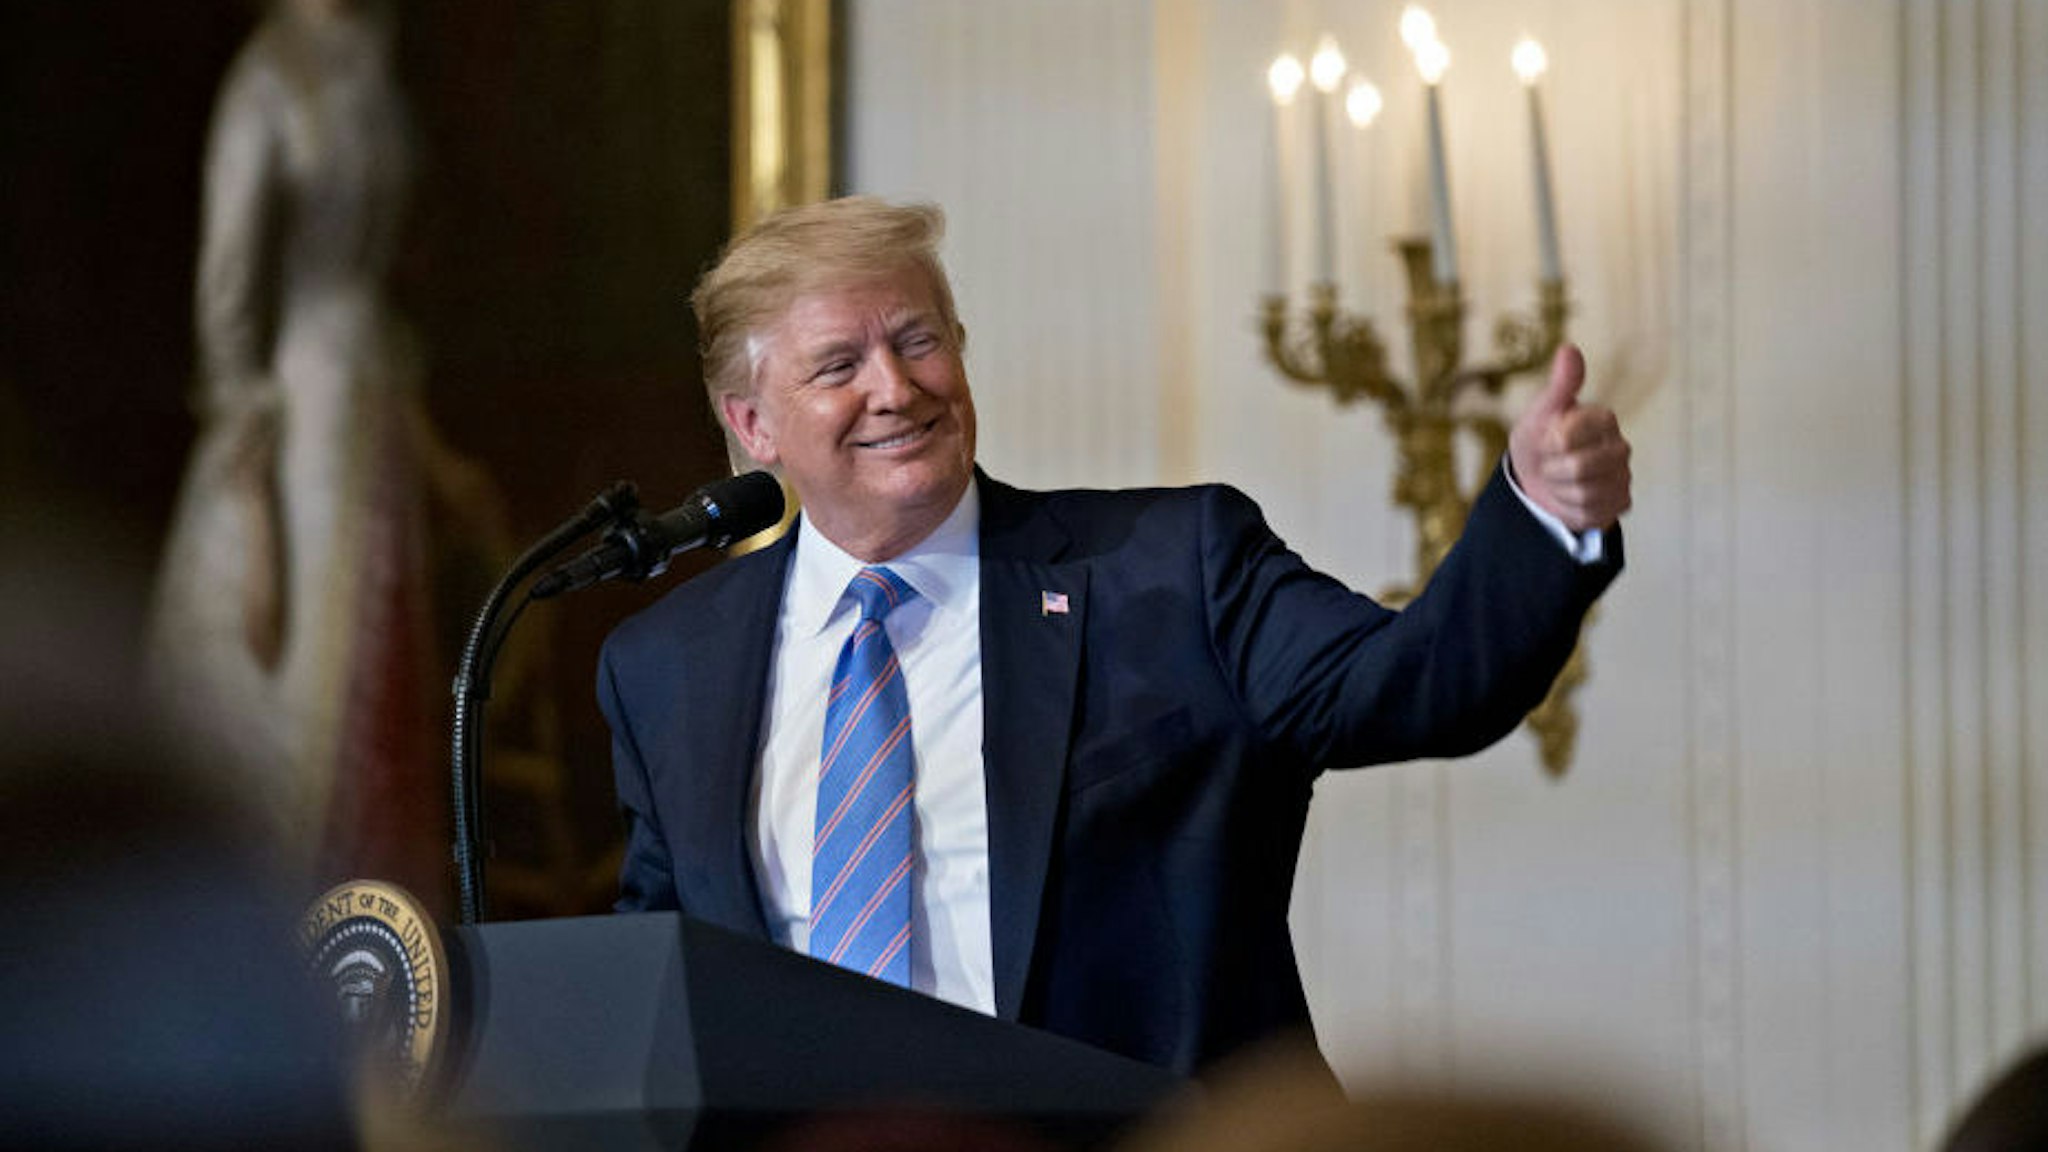 U.S. President Donald Trump gives a thumbs up while speaking during a Celebration of Military Mothers event in the East Room of the White House in Washington, D.C., U.S., on Friday, May 10, 2019. Trump's administration told China it has a month to seal a trade deal or face tariffs on all its exports to the U.S., even as both sides sought to avoid a public breakdown in negotiations despite a developing stalemate.